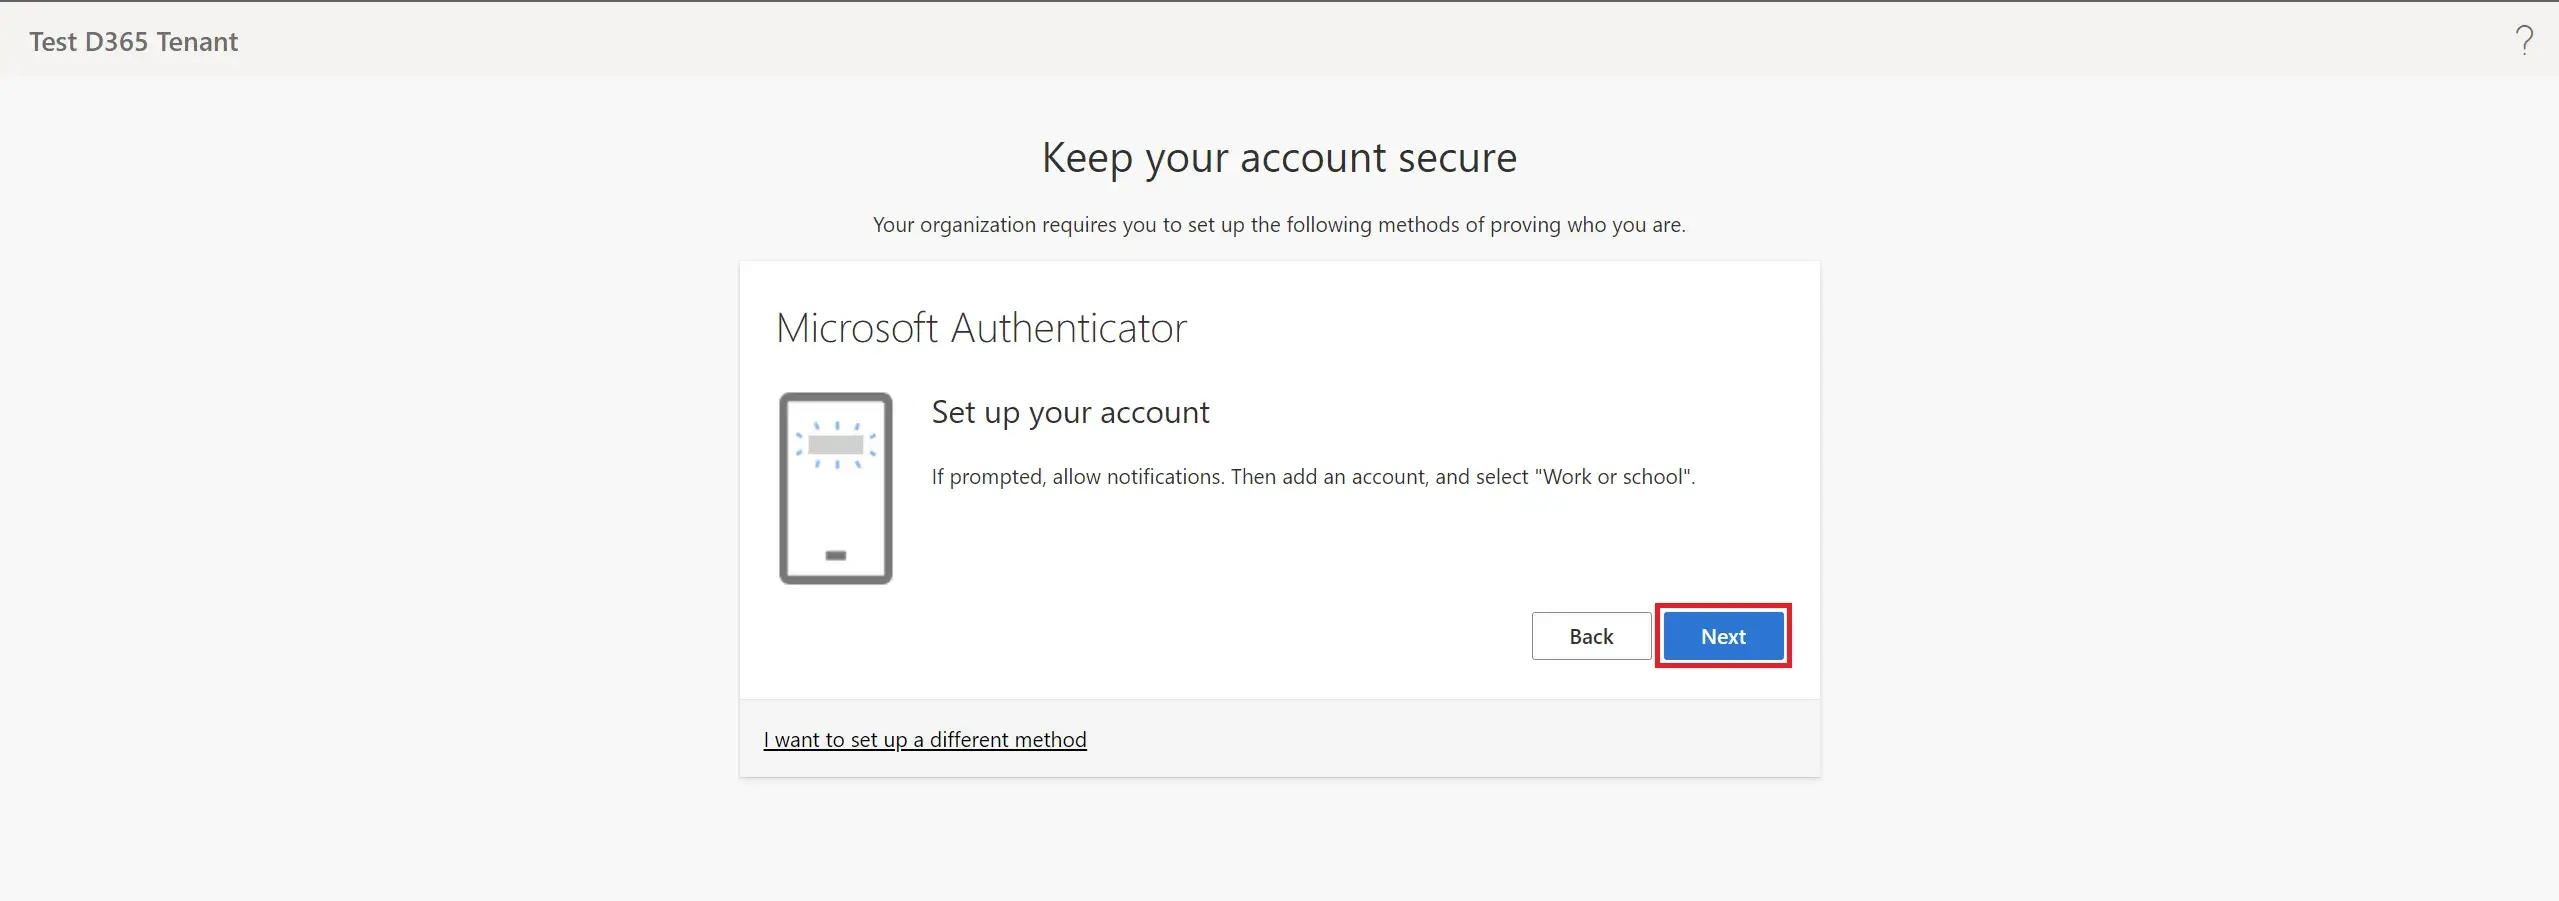 Microsoft Authenticator Dynamics D365 Business Central trail account